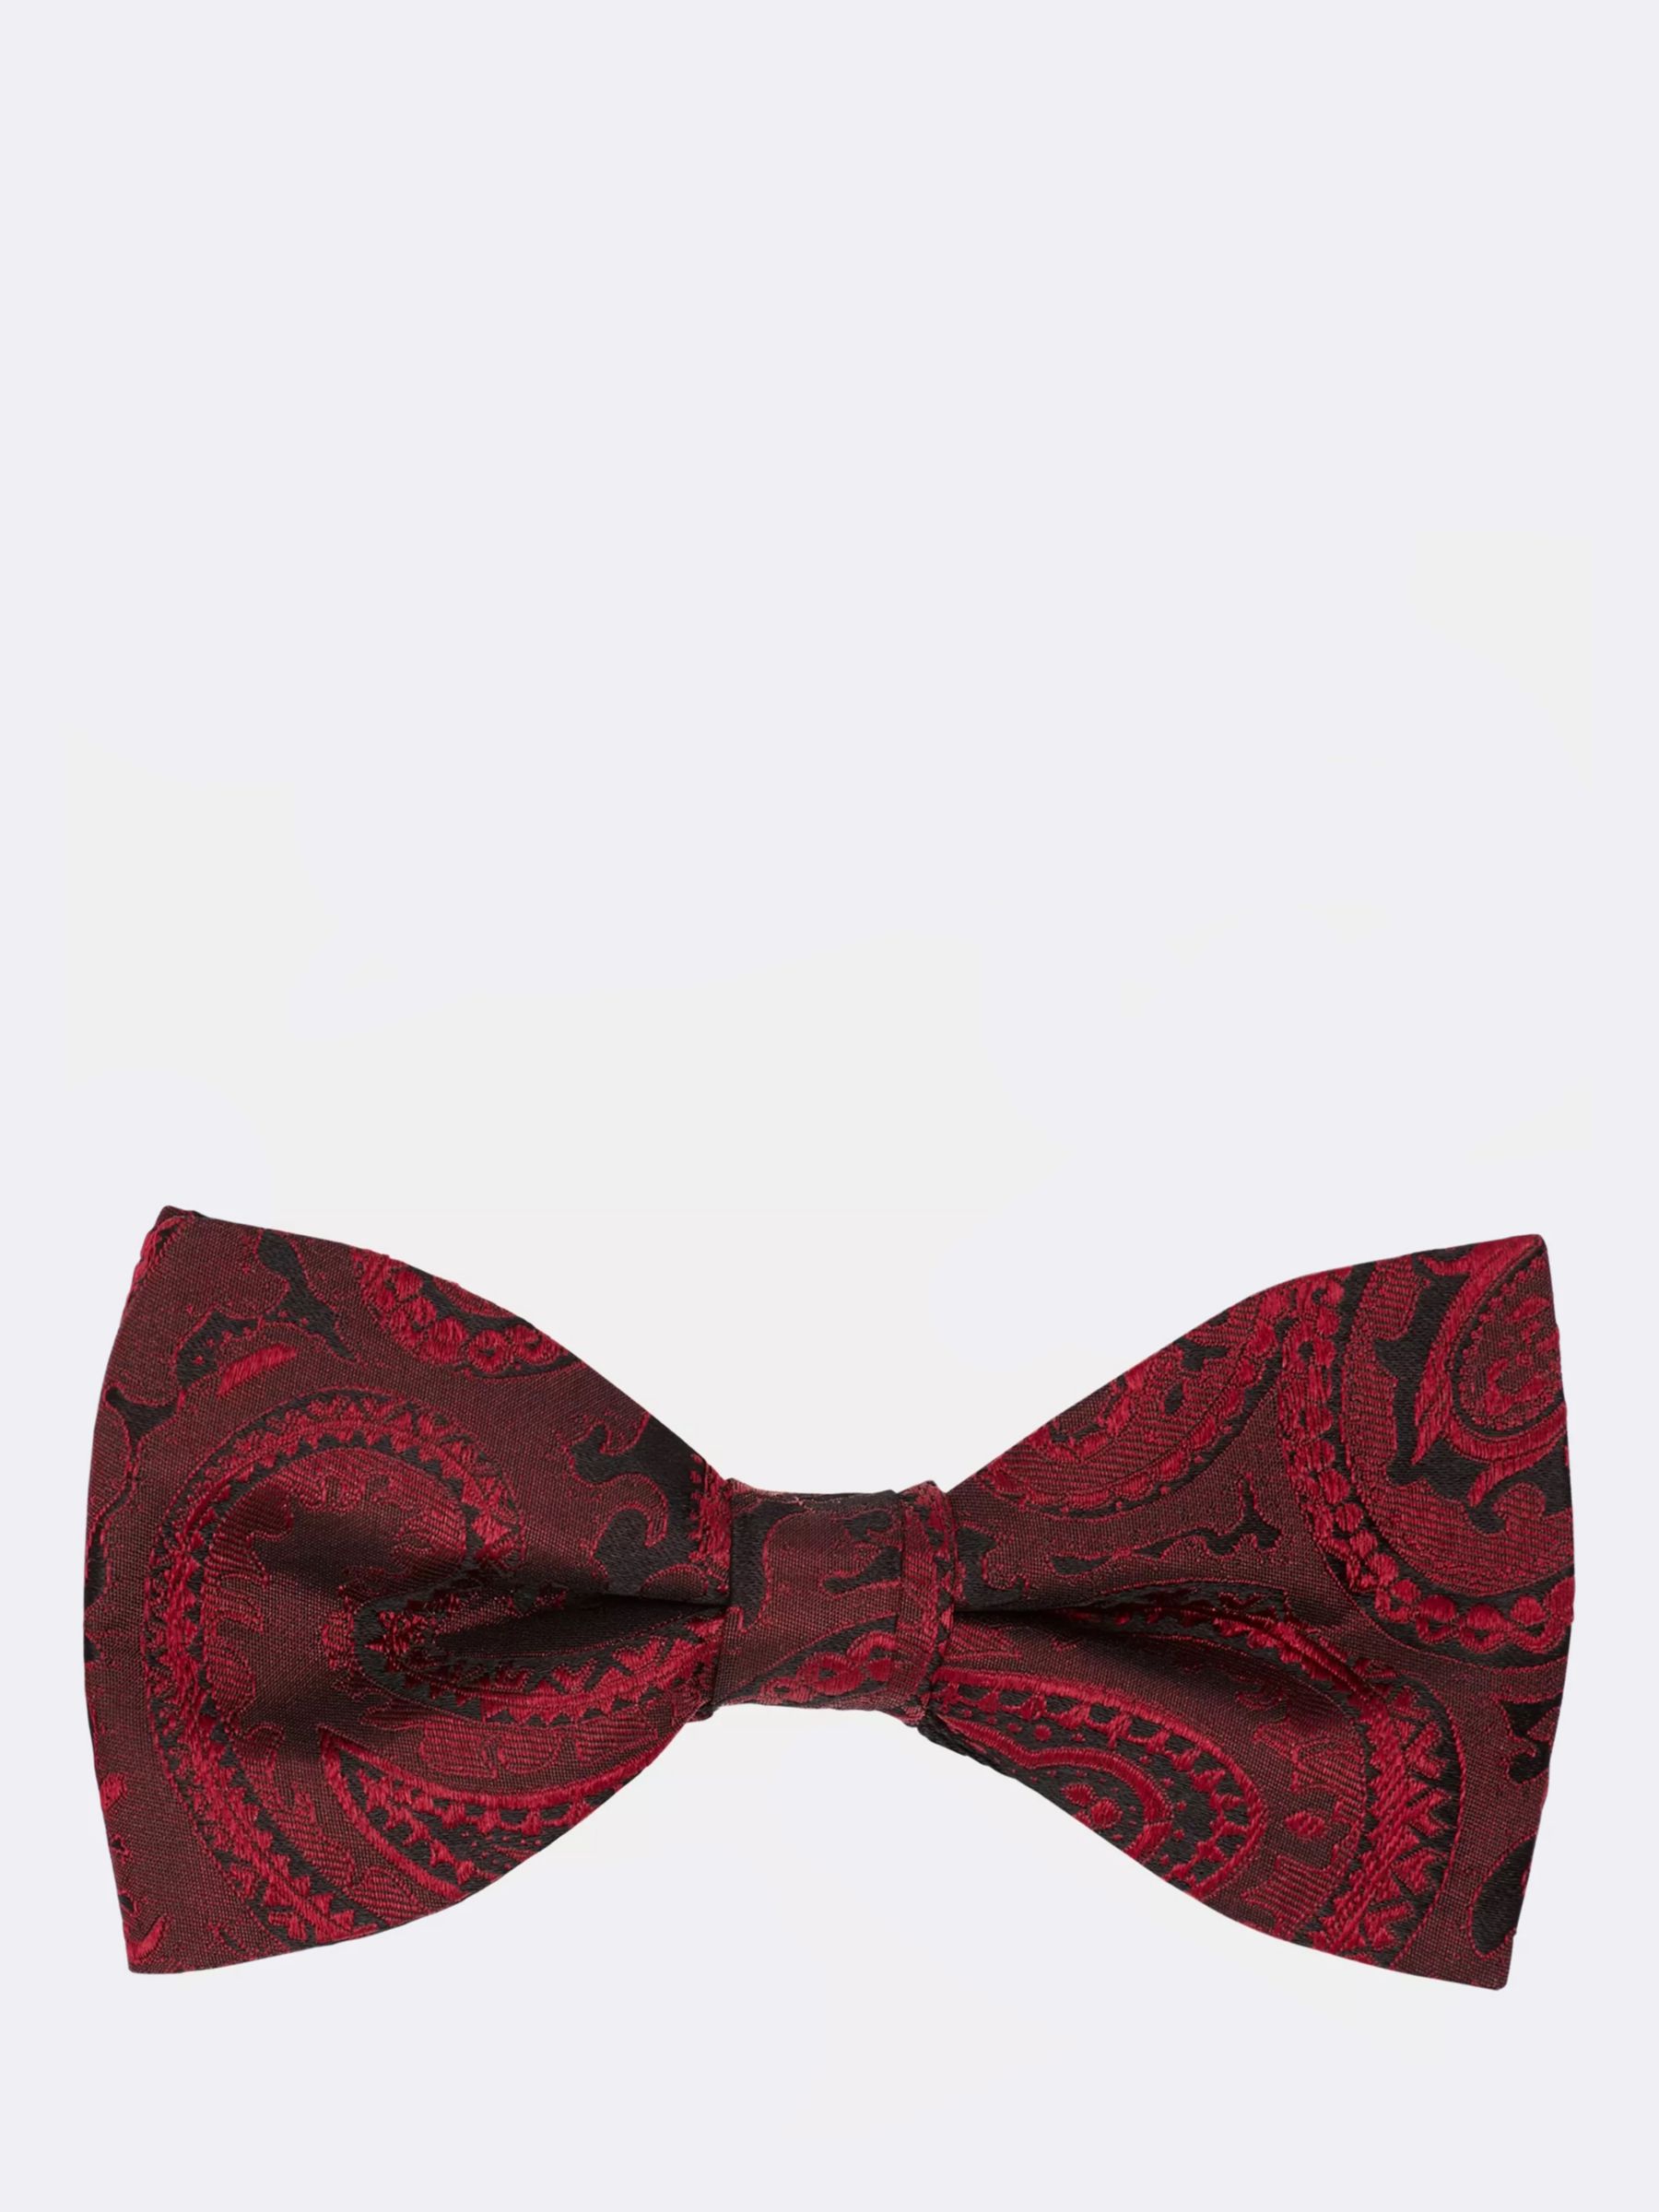 Moss Ready Tied Silk Paisley Bow Tie, Red, One Size